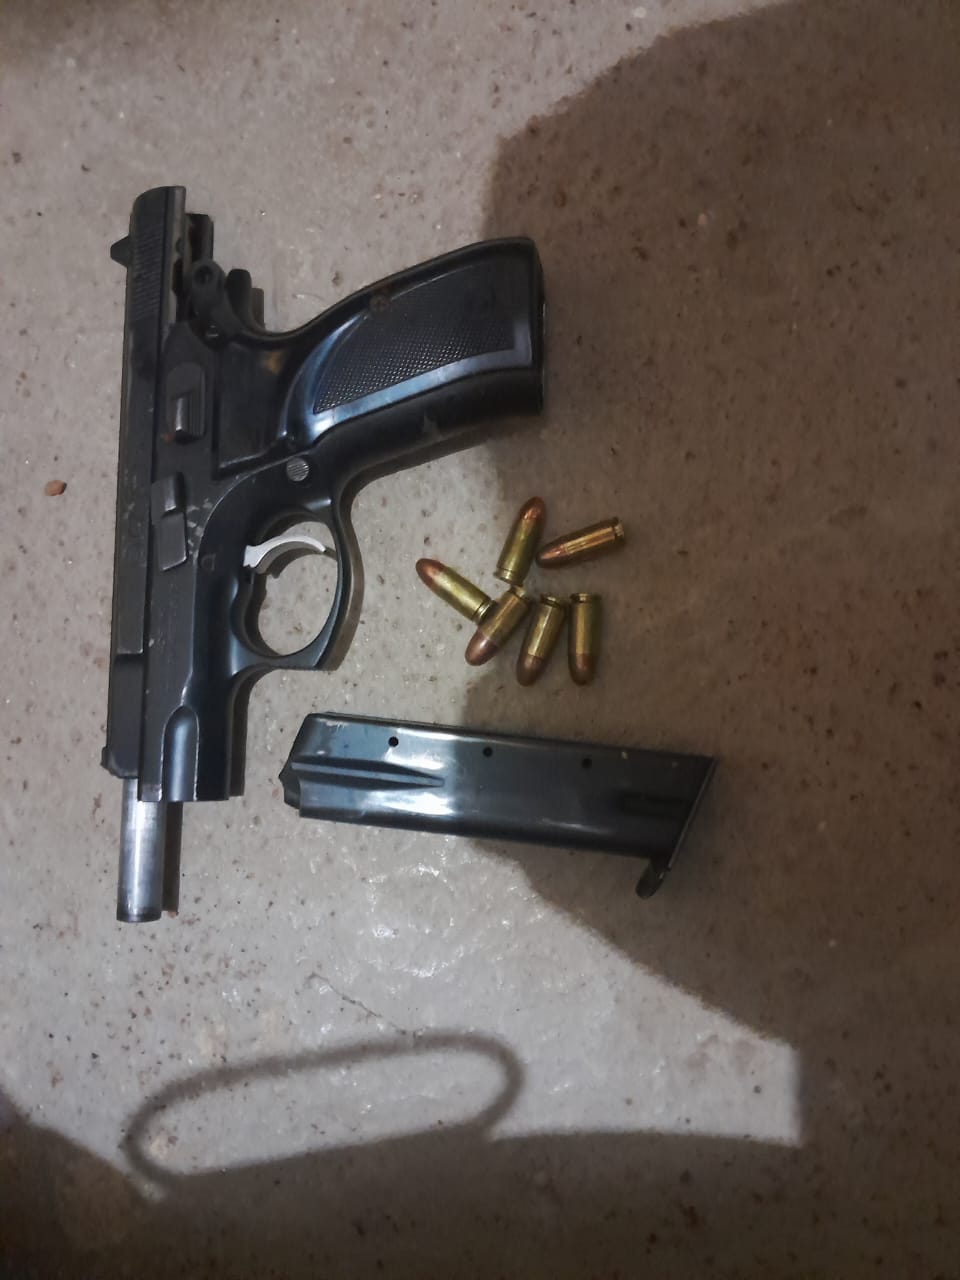 POLICE APPREHEND A 31-YEAR-OLD MALE SUSPECT FOR POSSESSION OF UNLICENSED FIREARM, AMMUNITION AND SUSPECTED STOLEN PROPERTIES